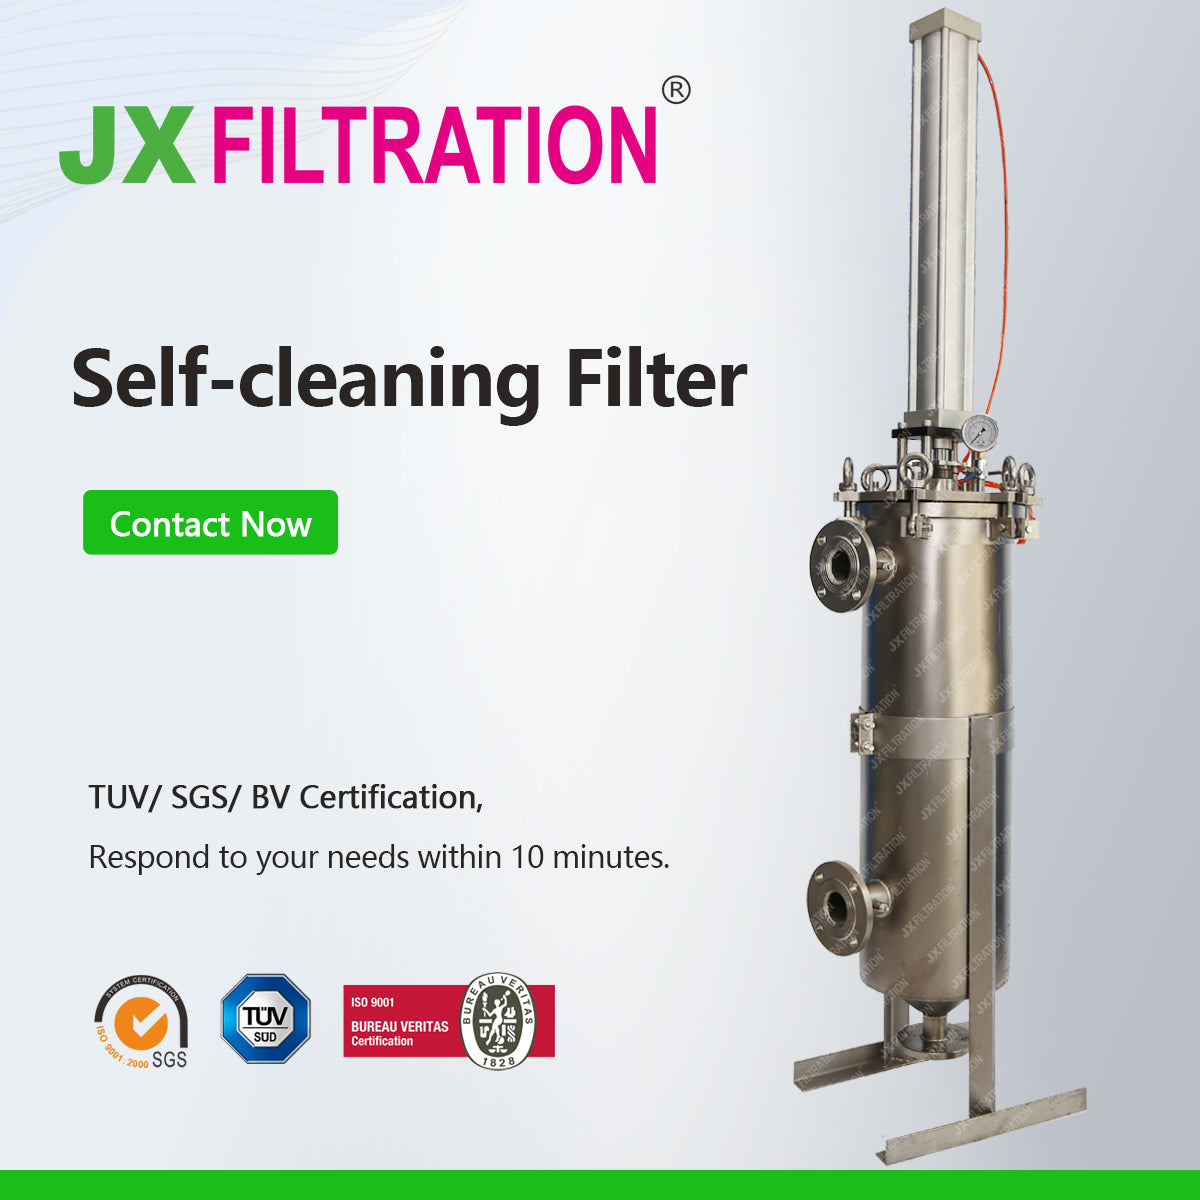 Model 630 Automatic Self-cleaning filter